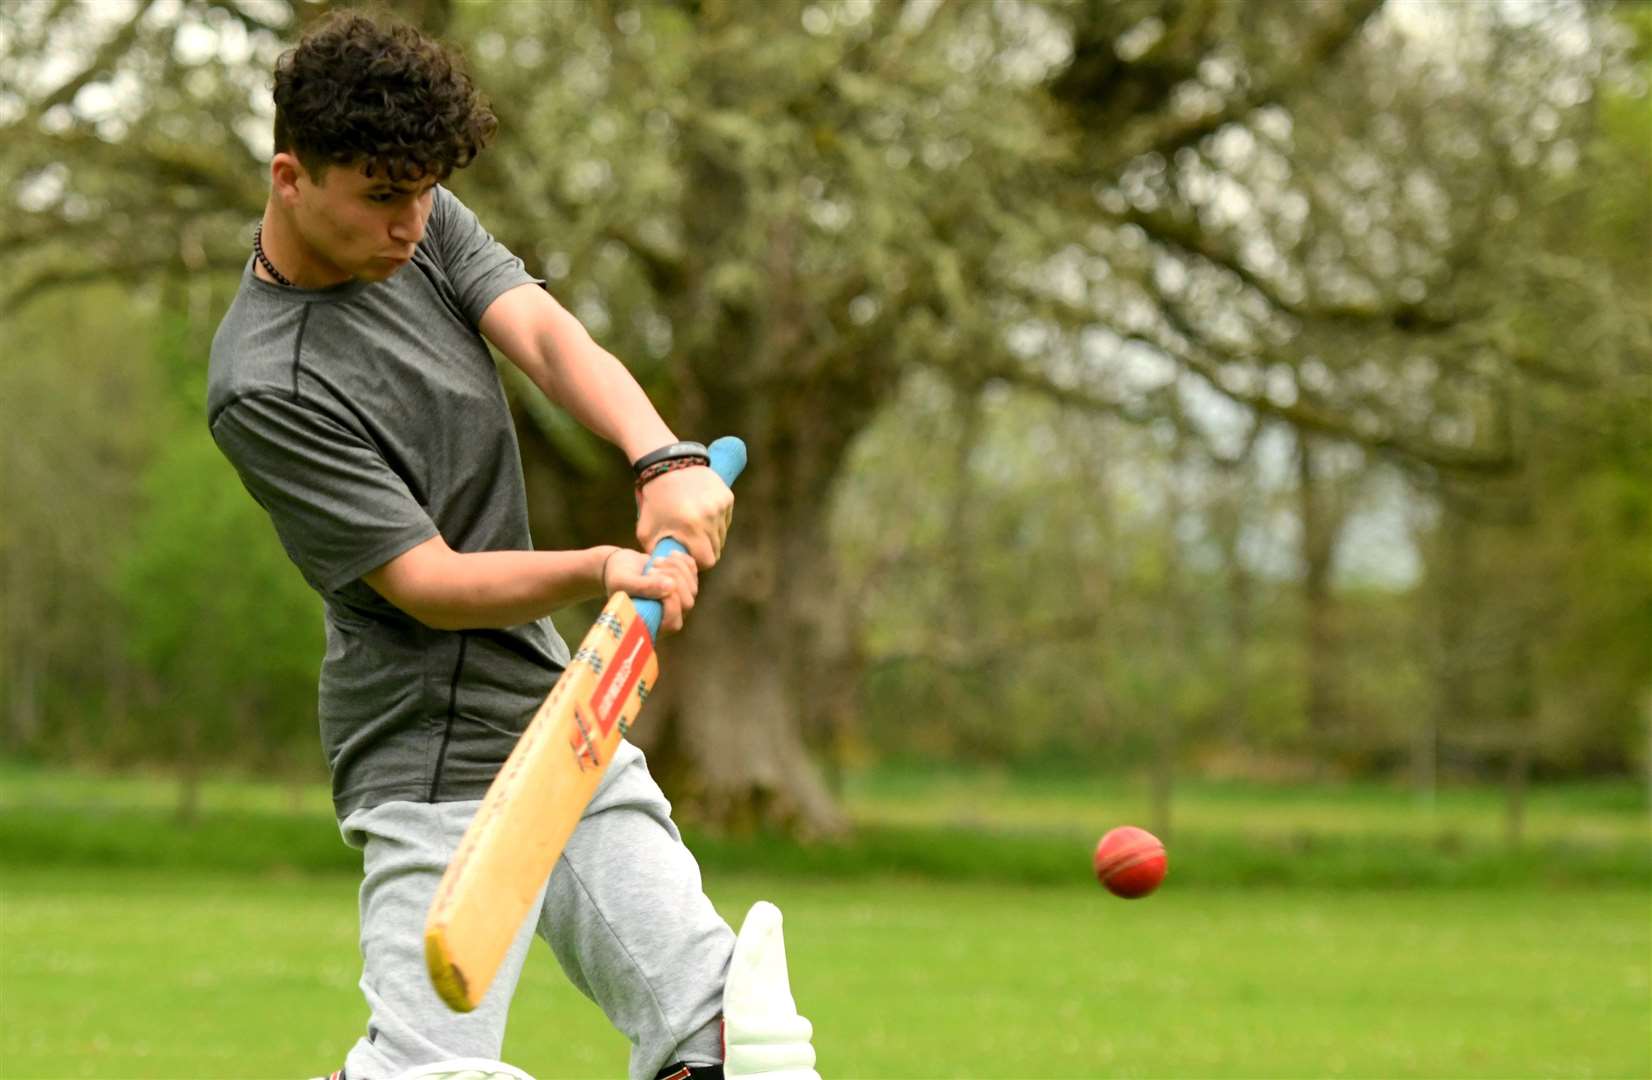 Despite a language barrier, there is no doubting the teenagers' enthusiasm for cricket. Picture: James Mackenzie